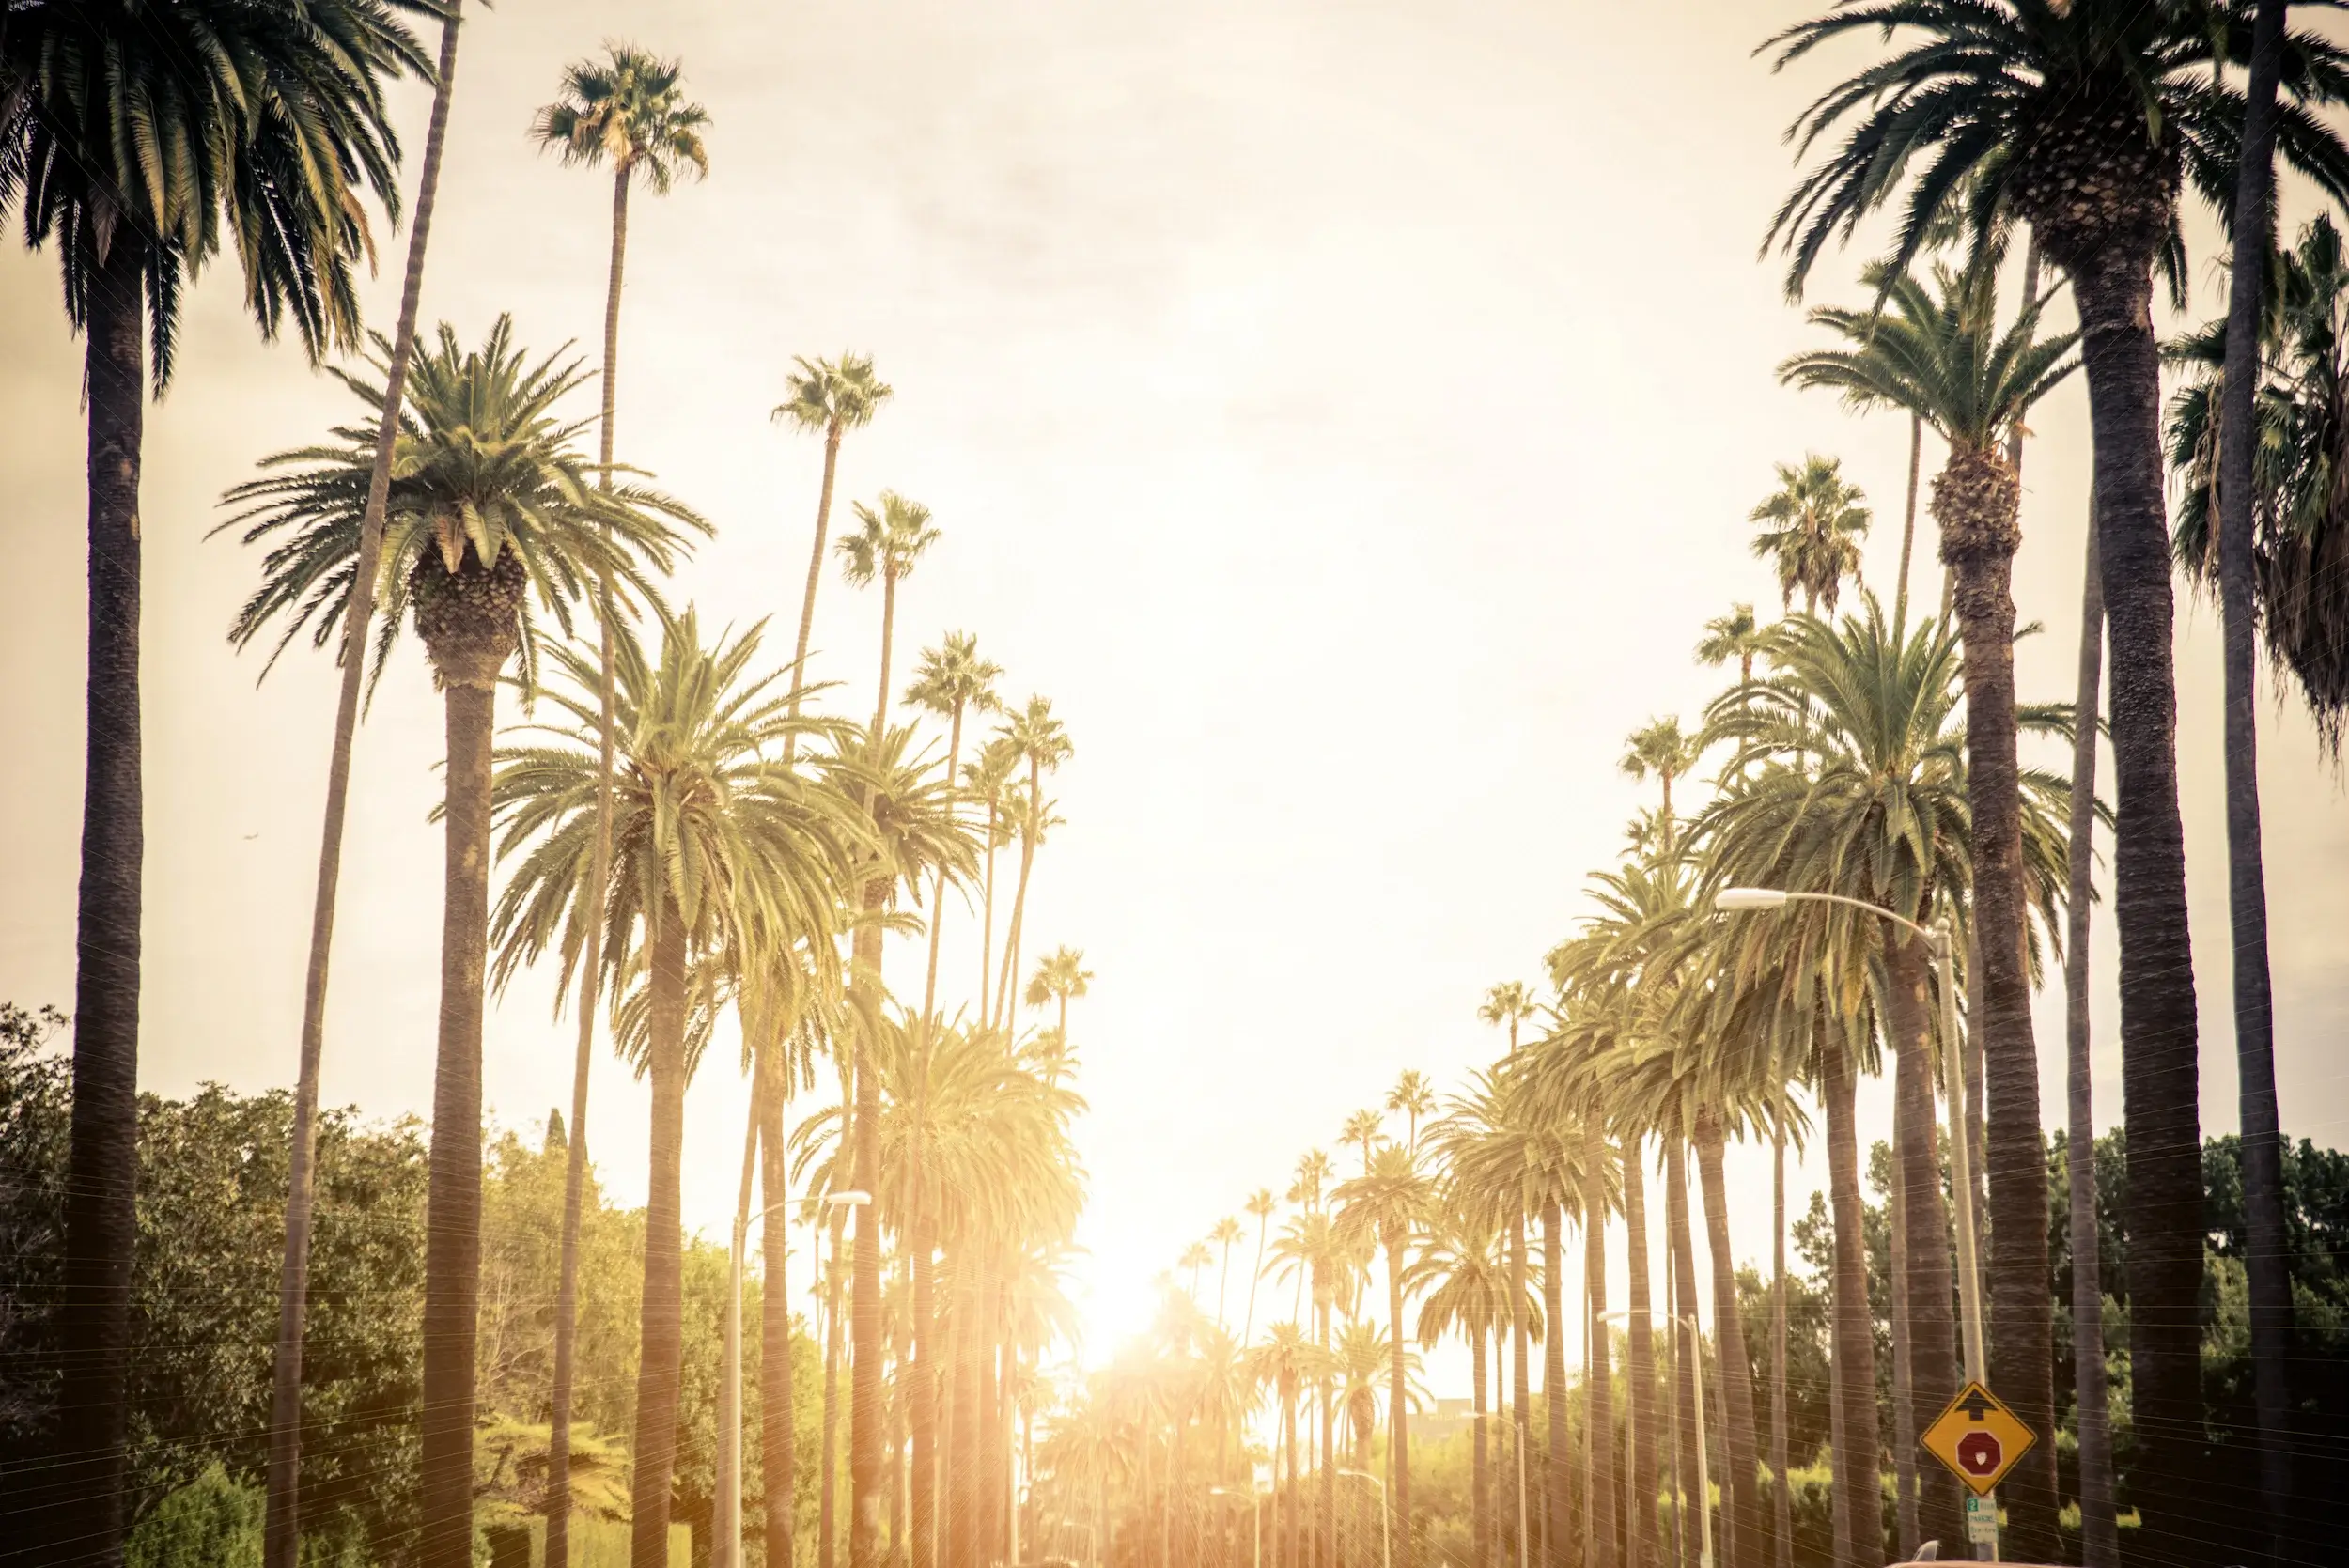 Beverly Hills street with palm trees at sunset, Los Angeles, California